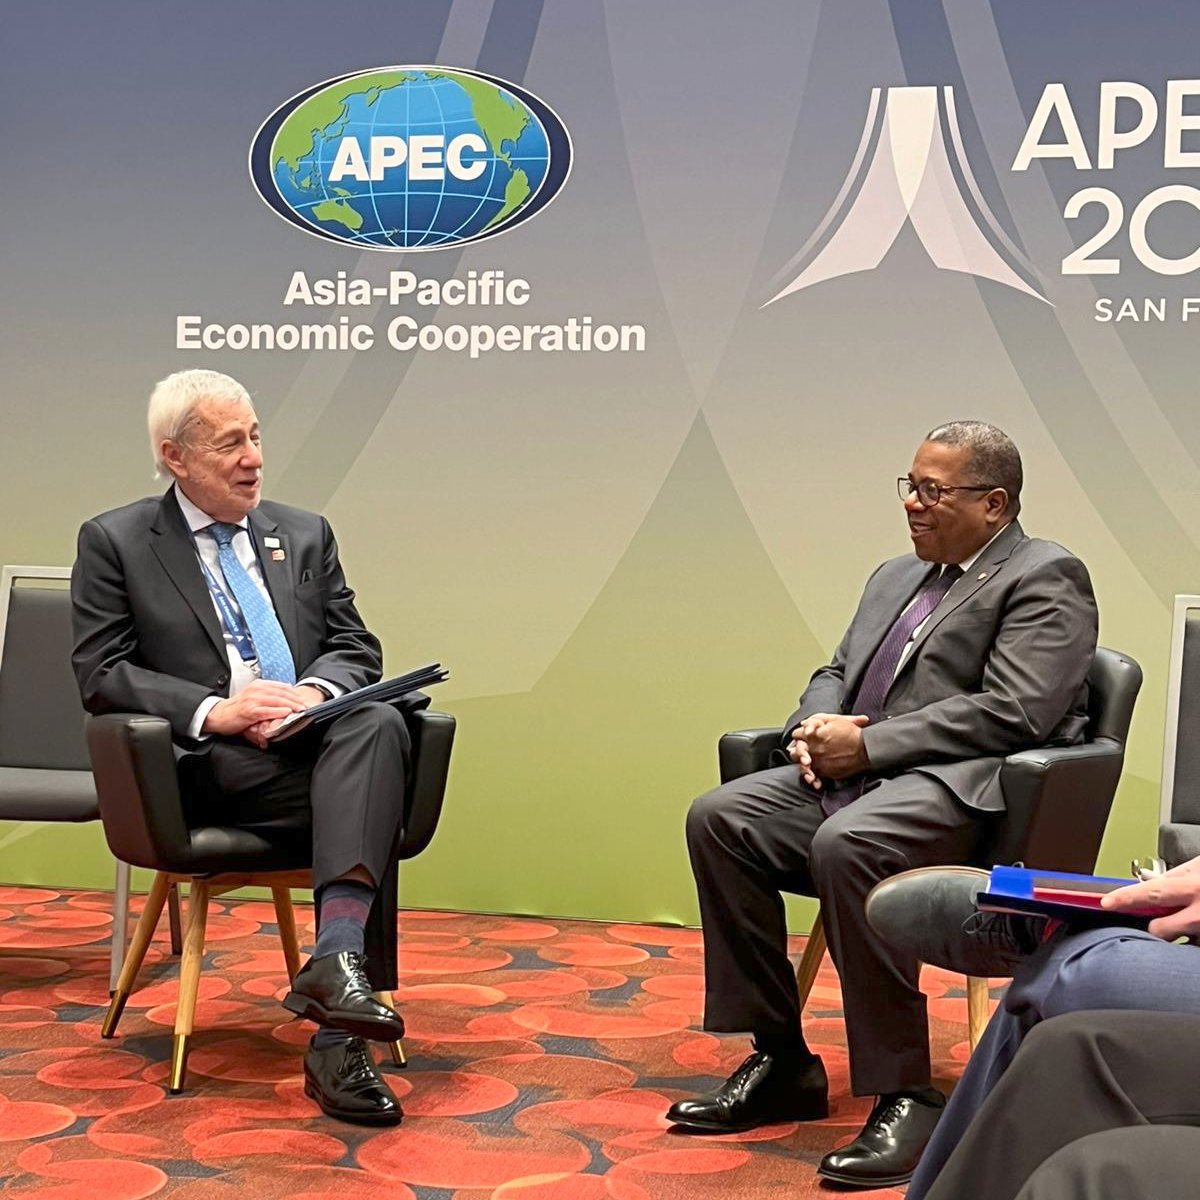 Good to meet with Chilean Foreign Minister @AlbertoKlaveren while at #APEC. After 200 years of Chile-U.S. relations, we continue to advance our work together. We're eager to make progress toward the #AmericasPartnership goals, including creating a clean energy future. -BAN